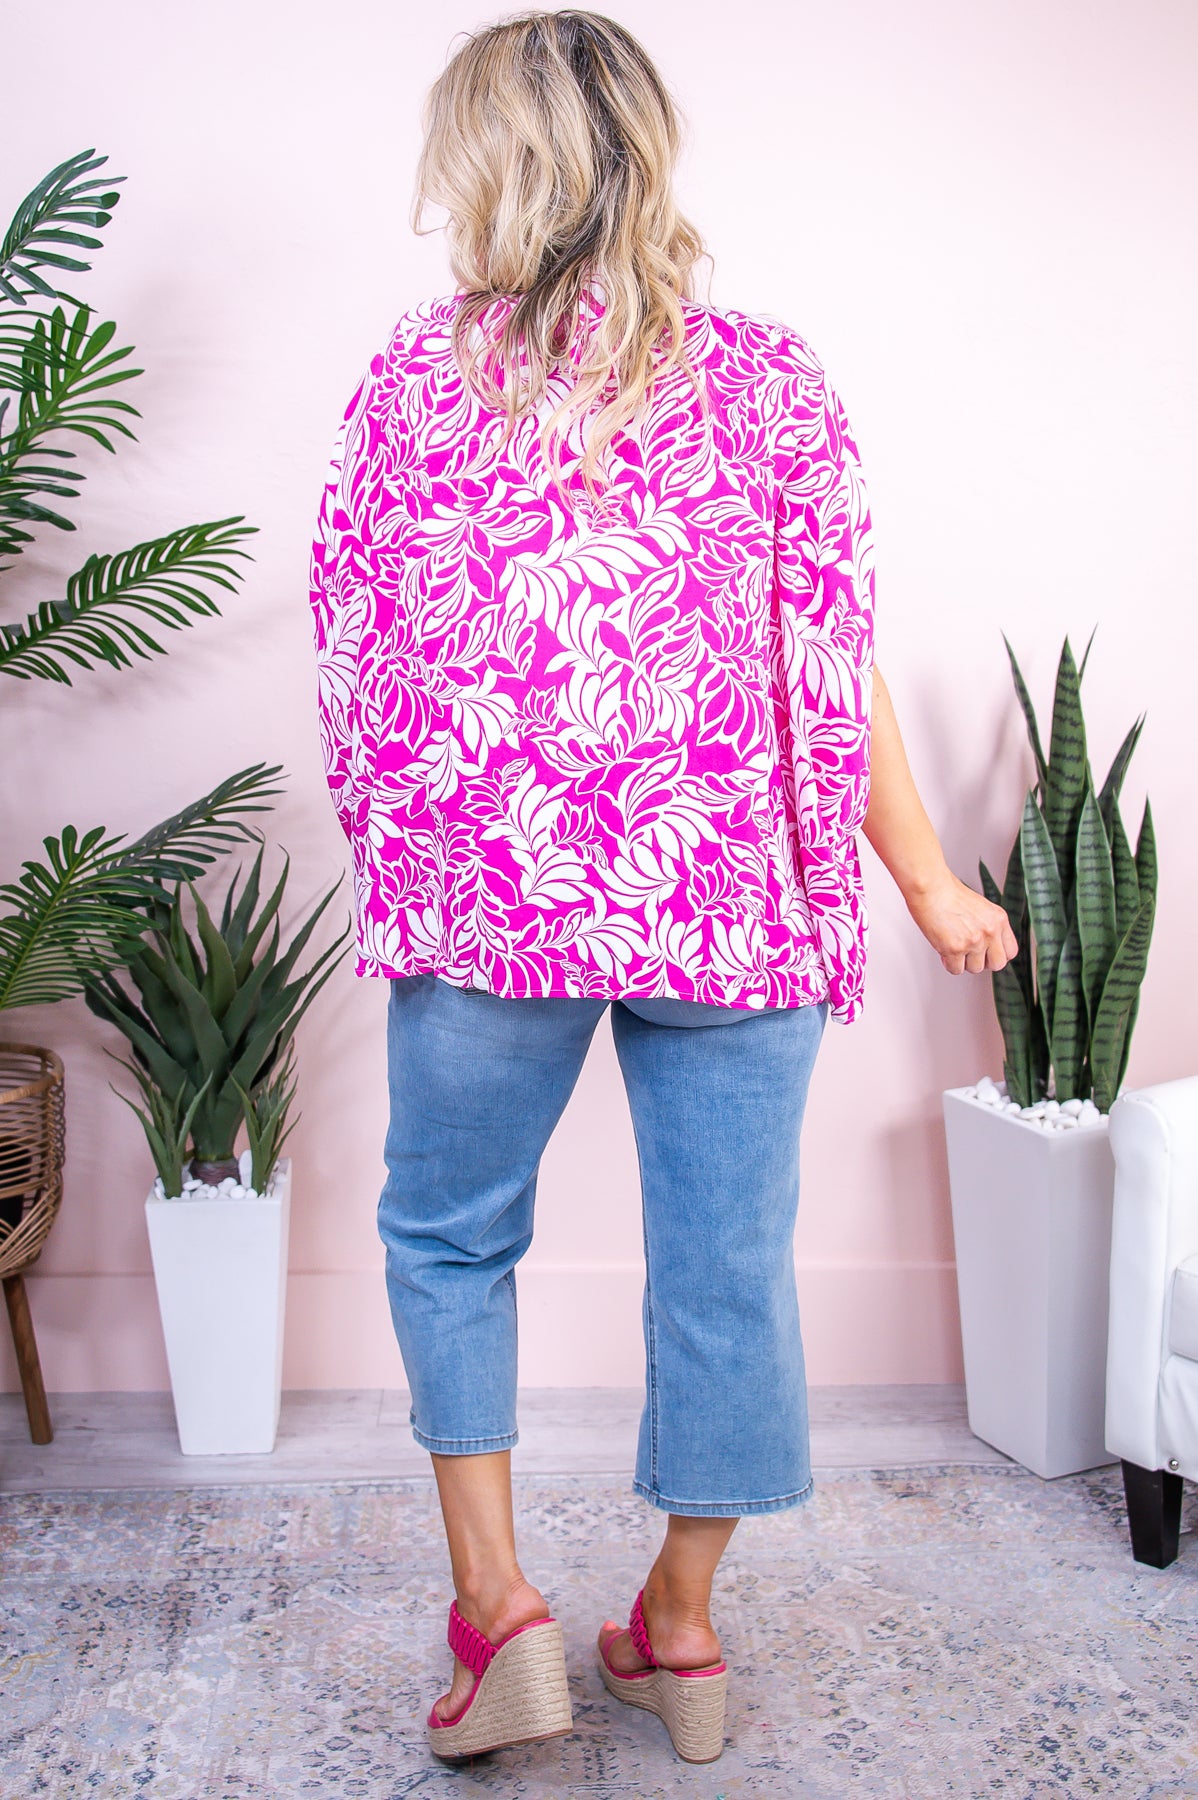 At The Harbor Hot Pink/White Floral Asymmetrical Top - T9556HPK